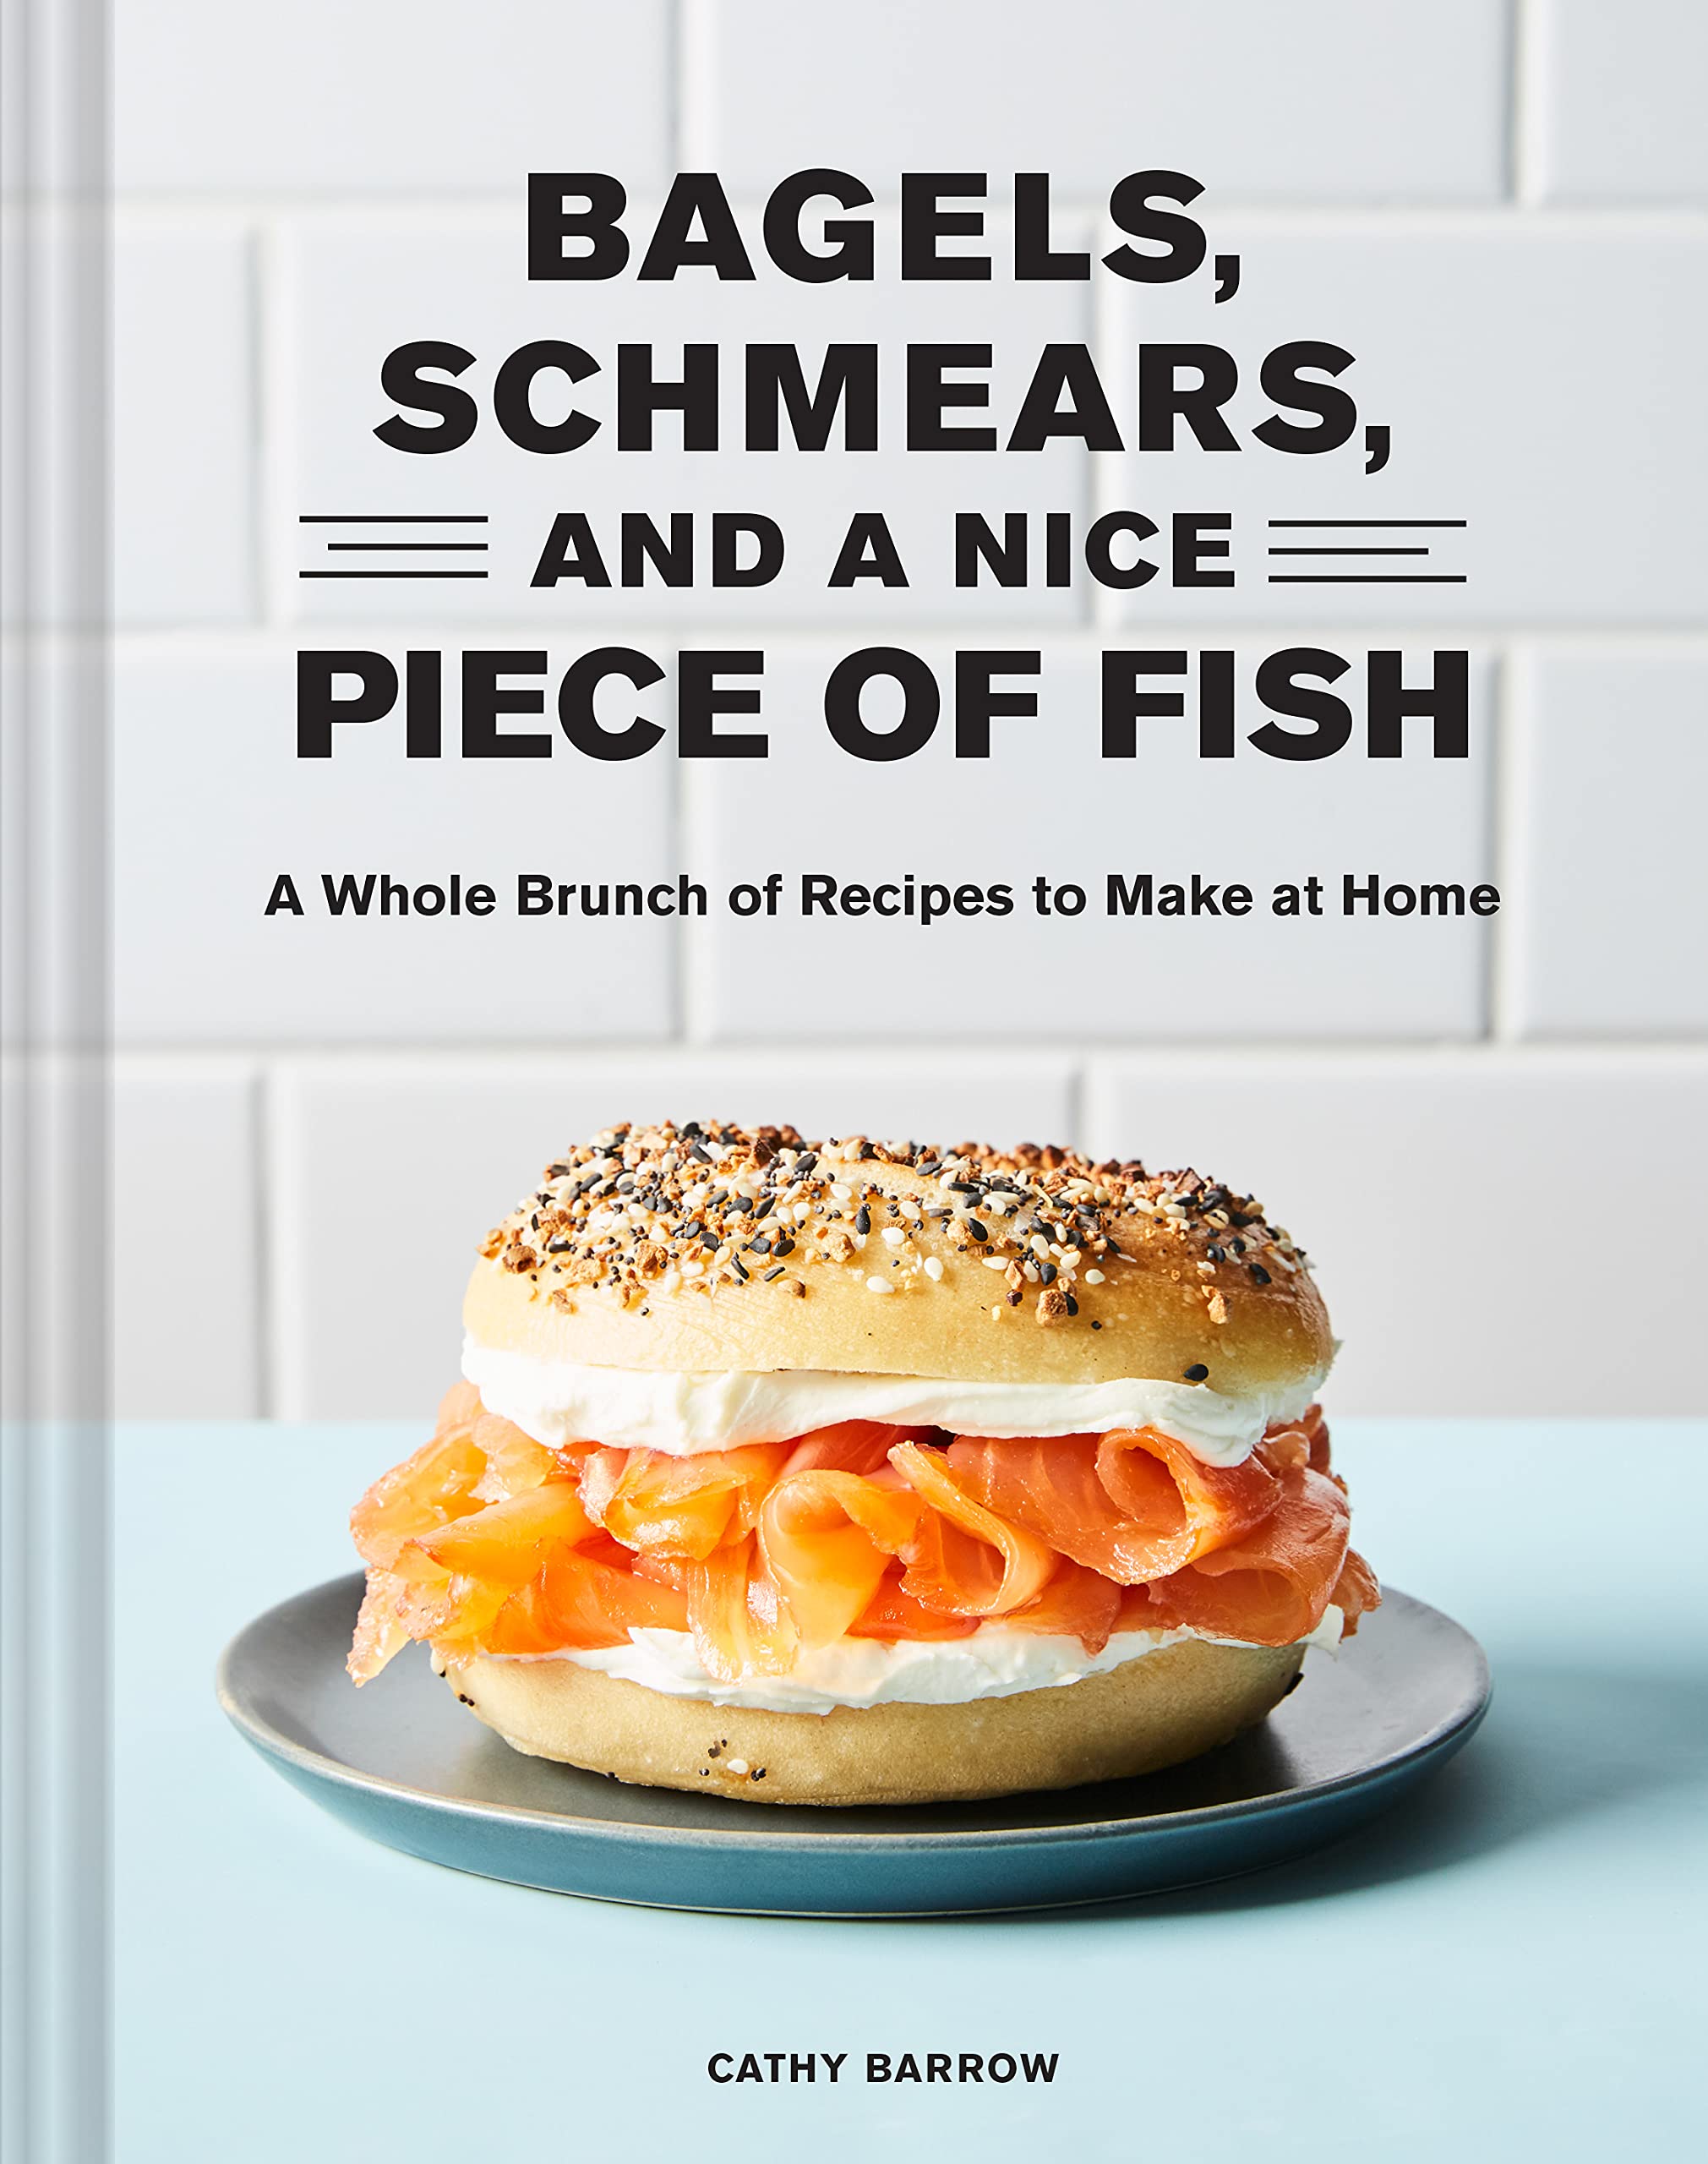 Bagels, Schmears, and a Nice Piece of Fish: A Whole Brunch of Recipes to Make at Home (Cathy Barrow, Linda Xiao) *Signed*